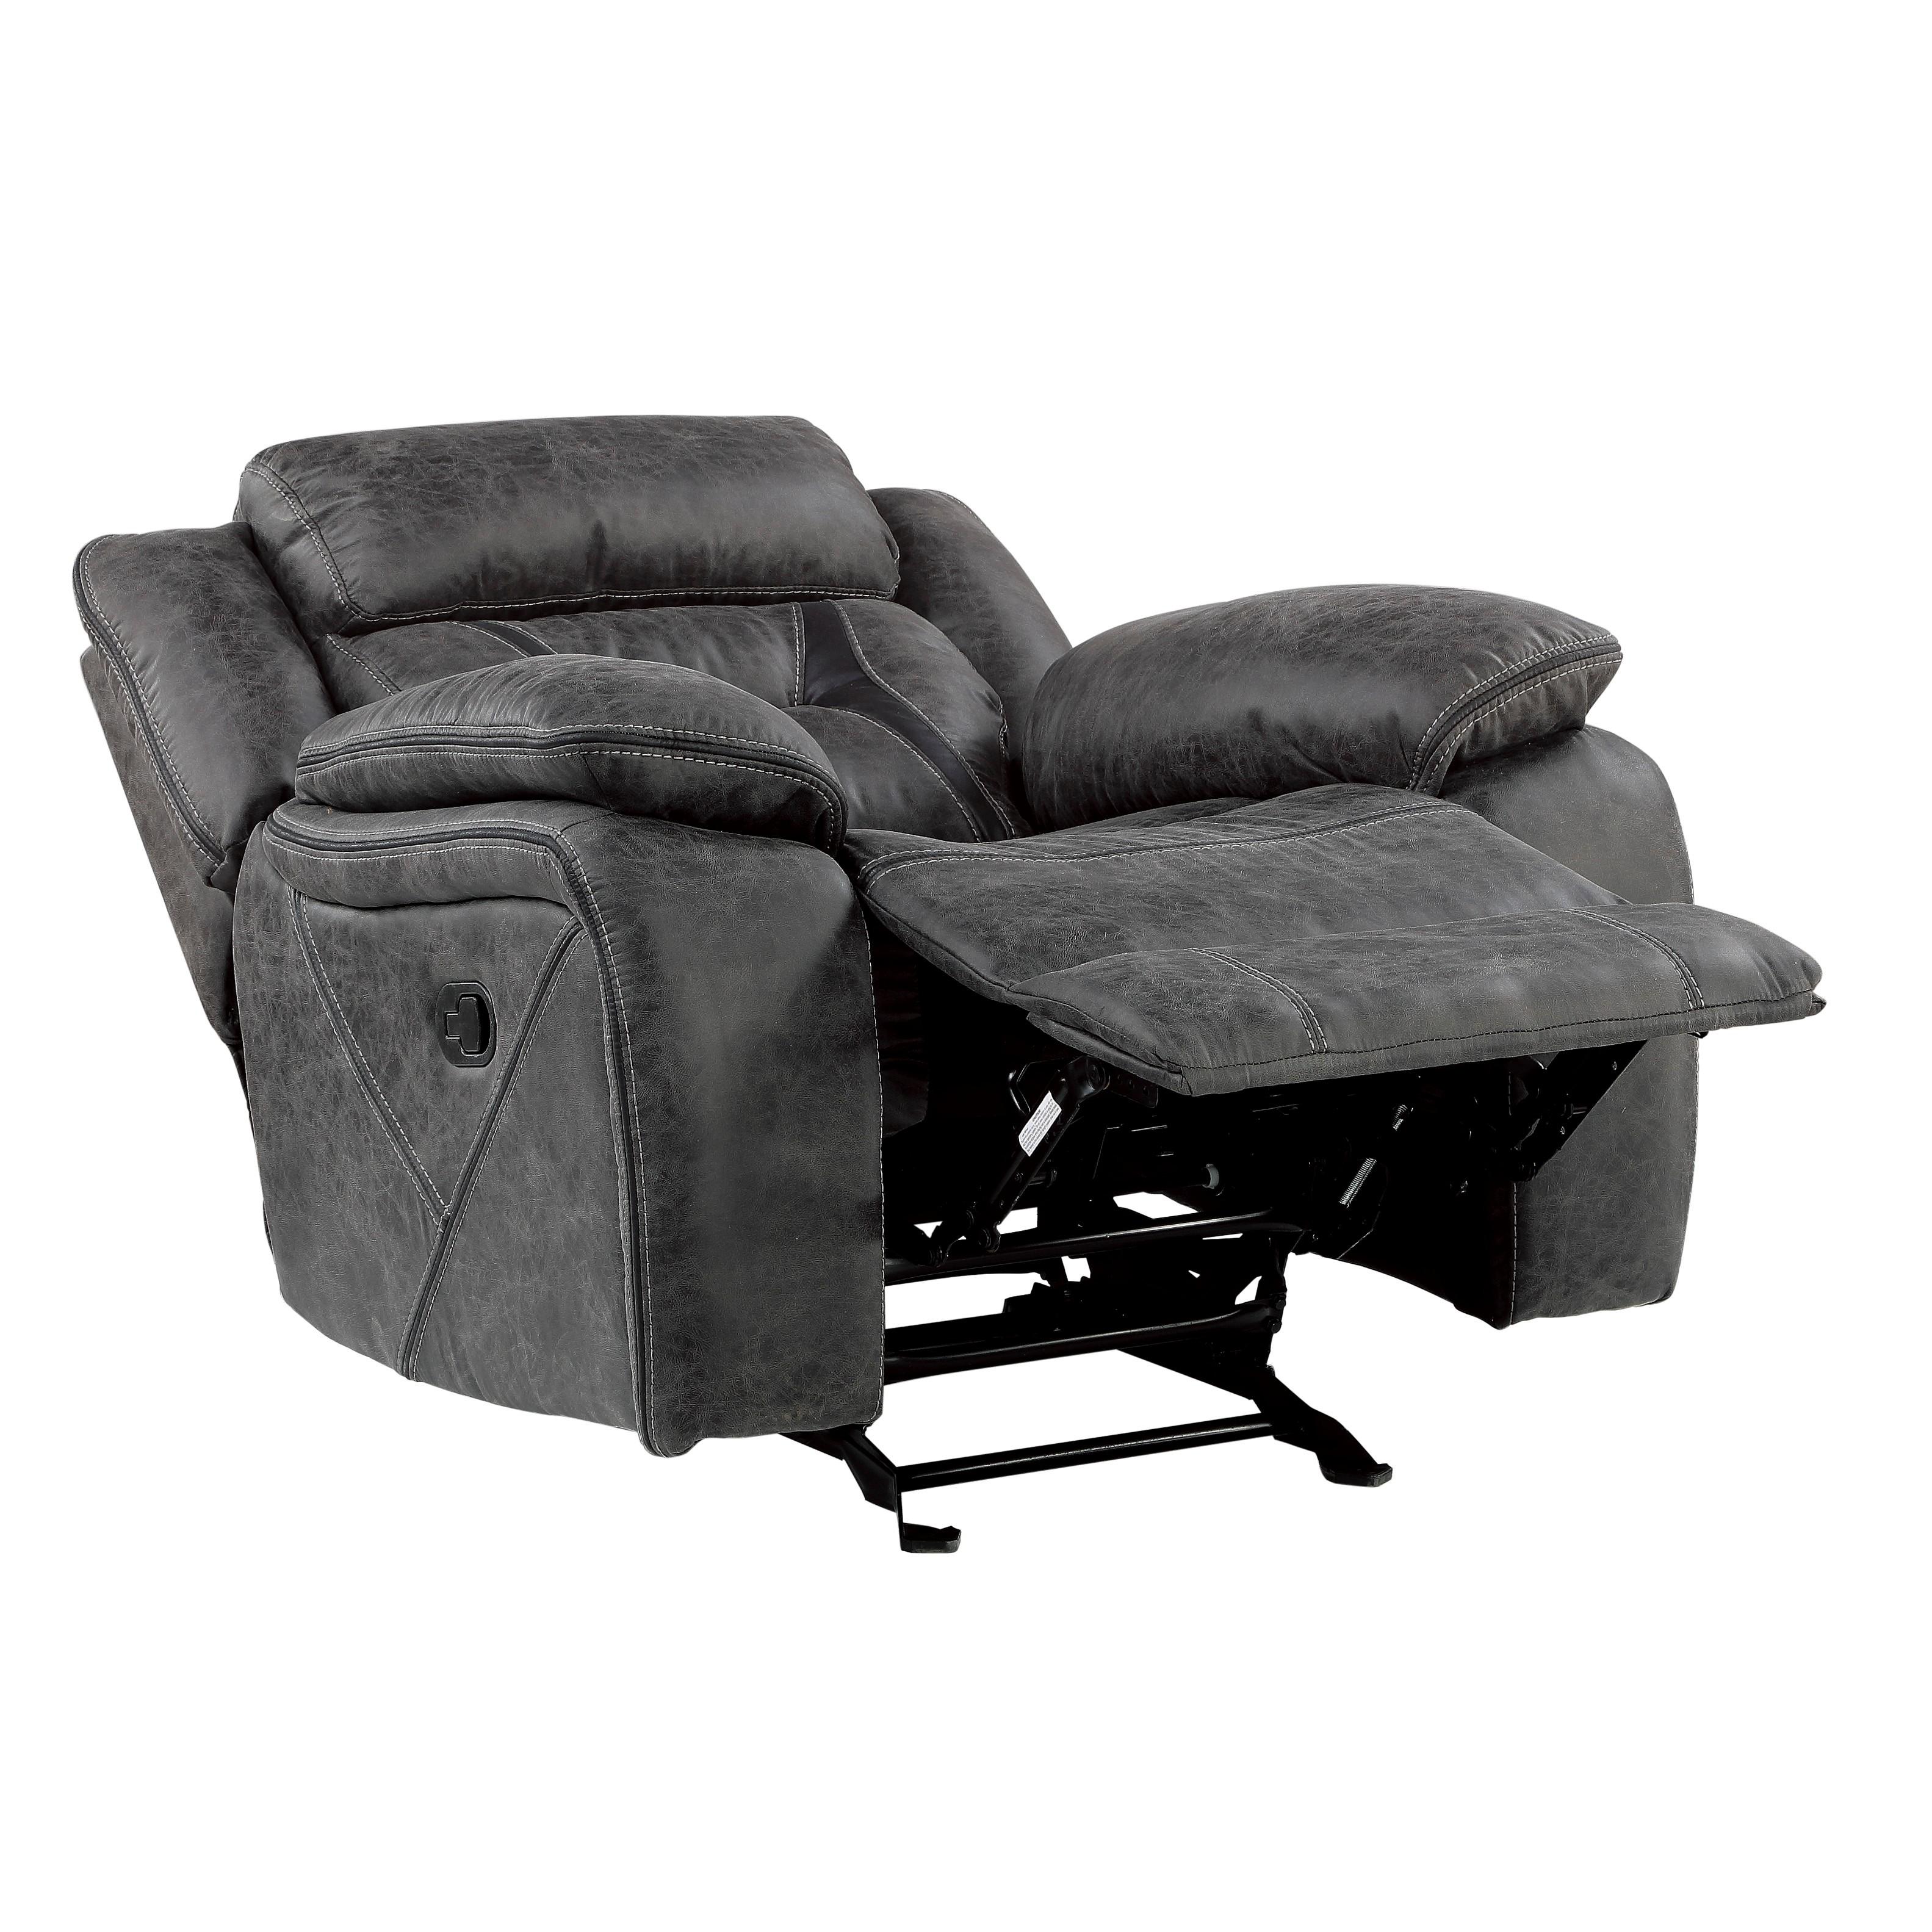 

    
Homelegance 9989GY-1 Madrona Hill Reclining Chair Gray 9989GY-1
